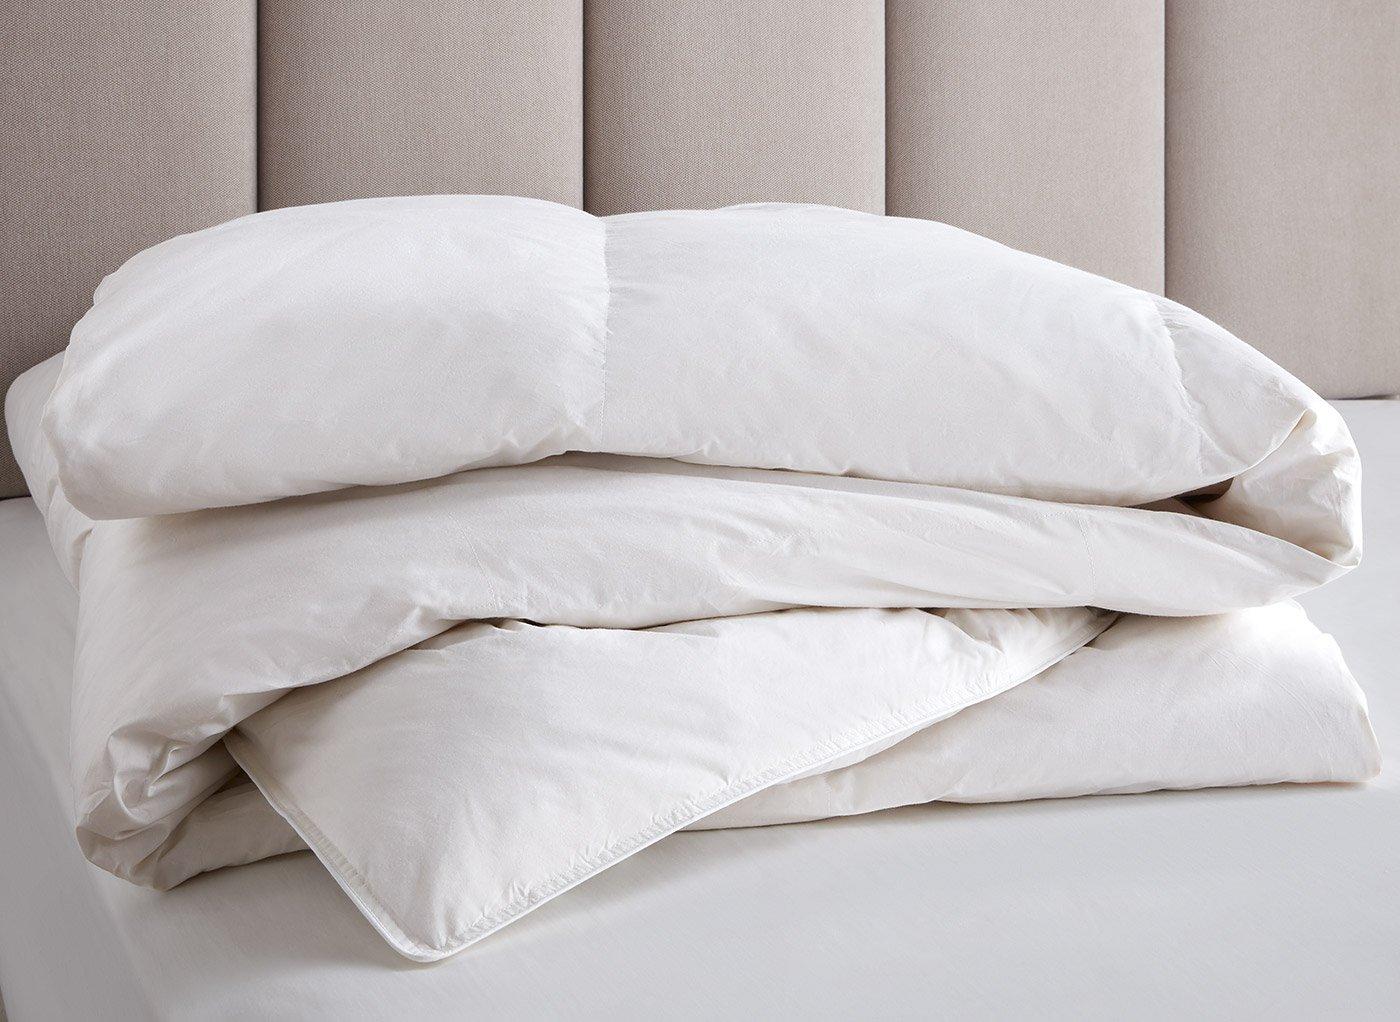 Duvets Duvets For All Shapes Sizes At Low Prices Dreams